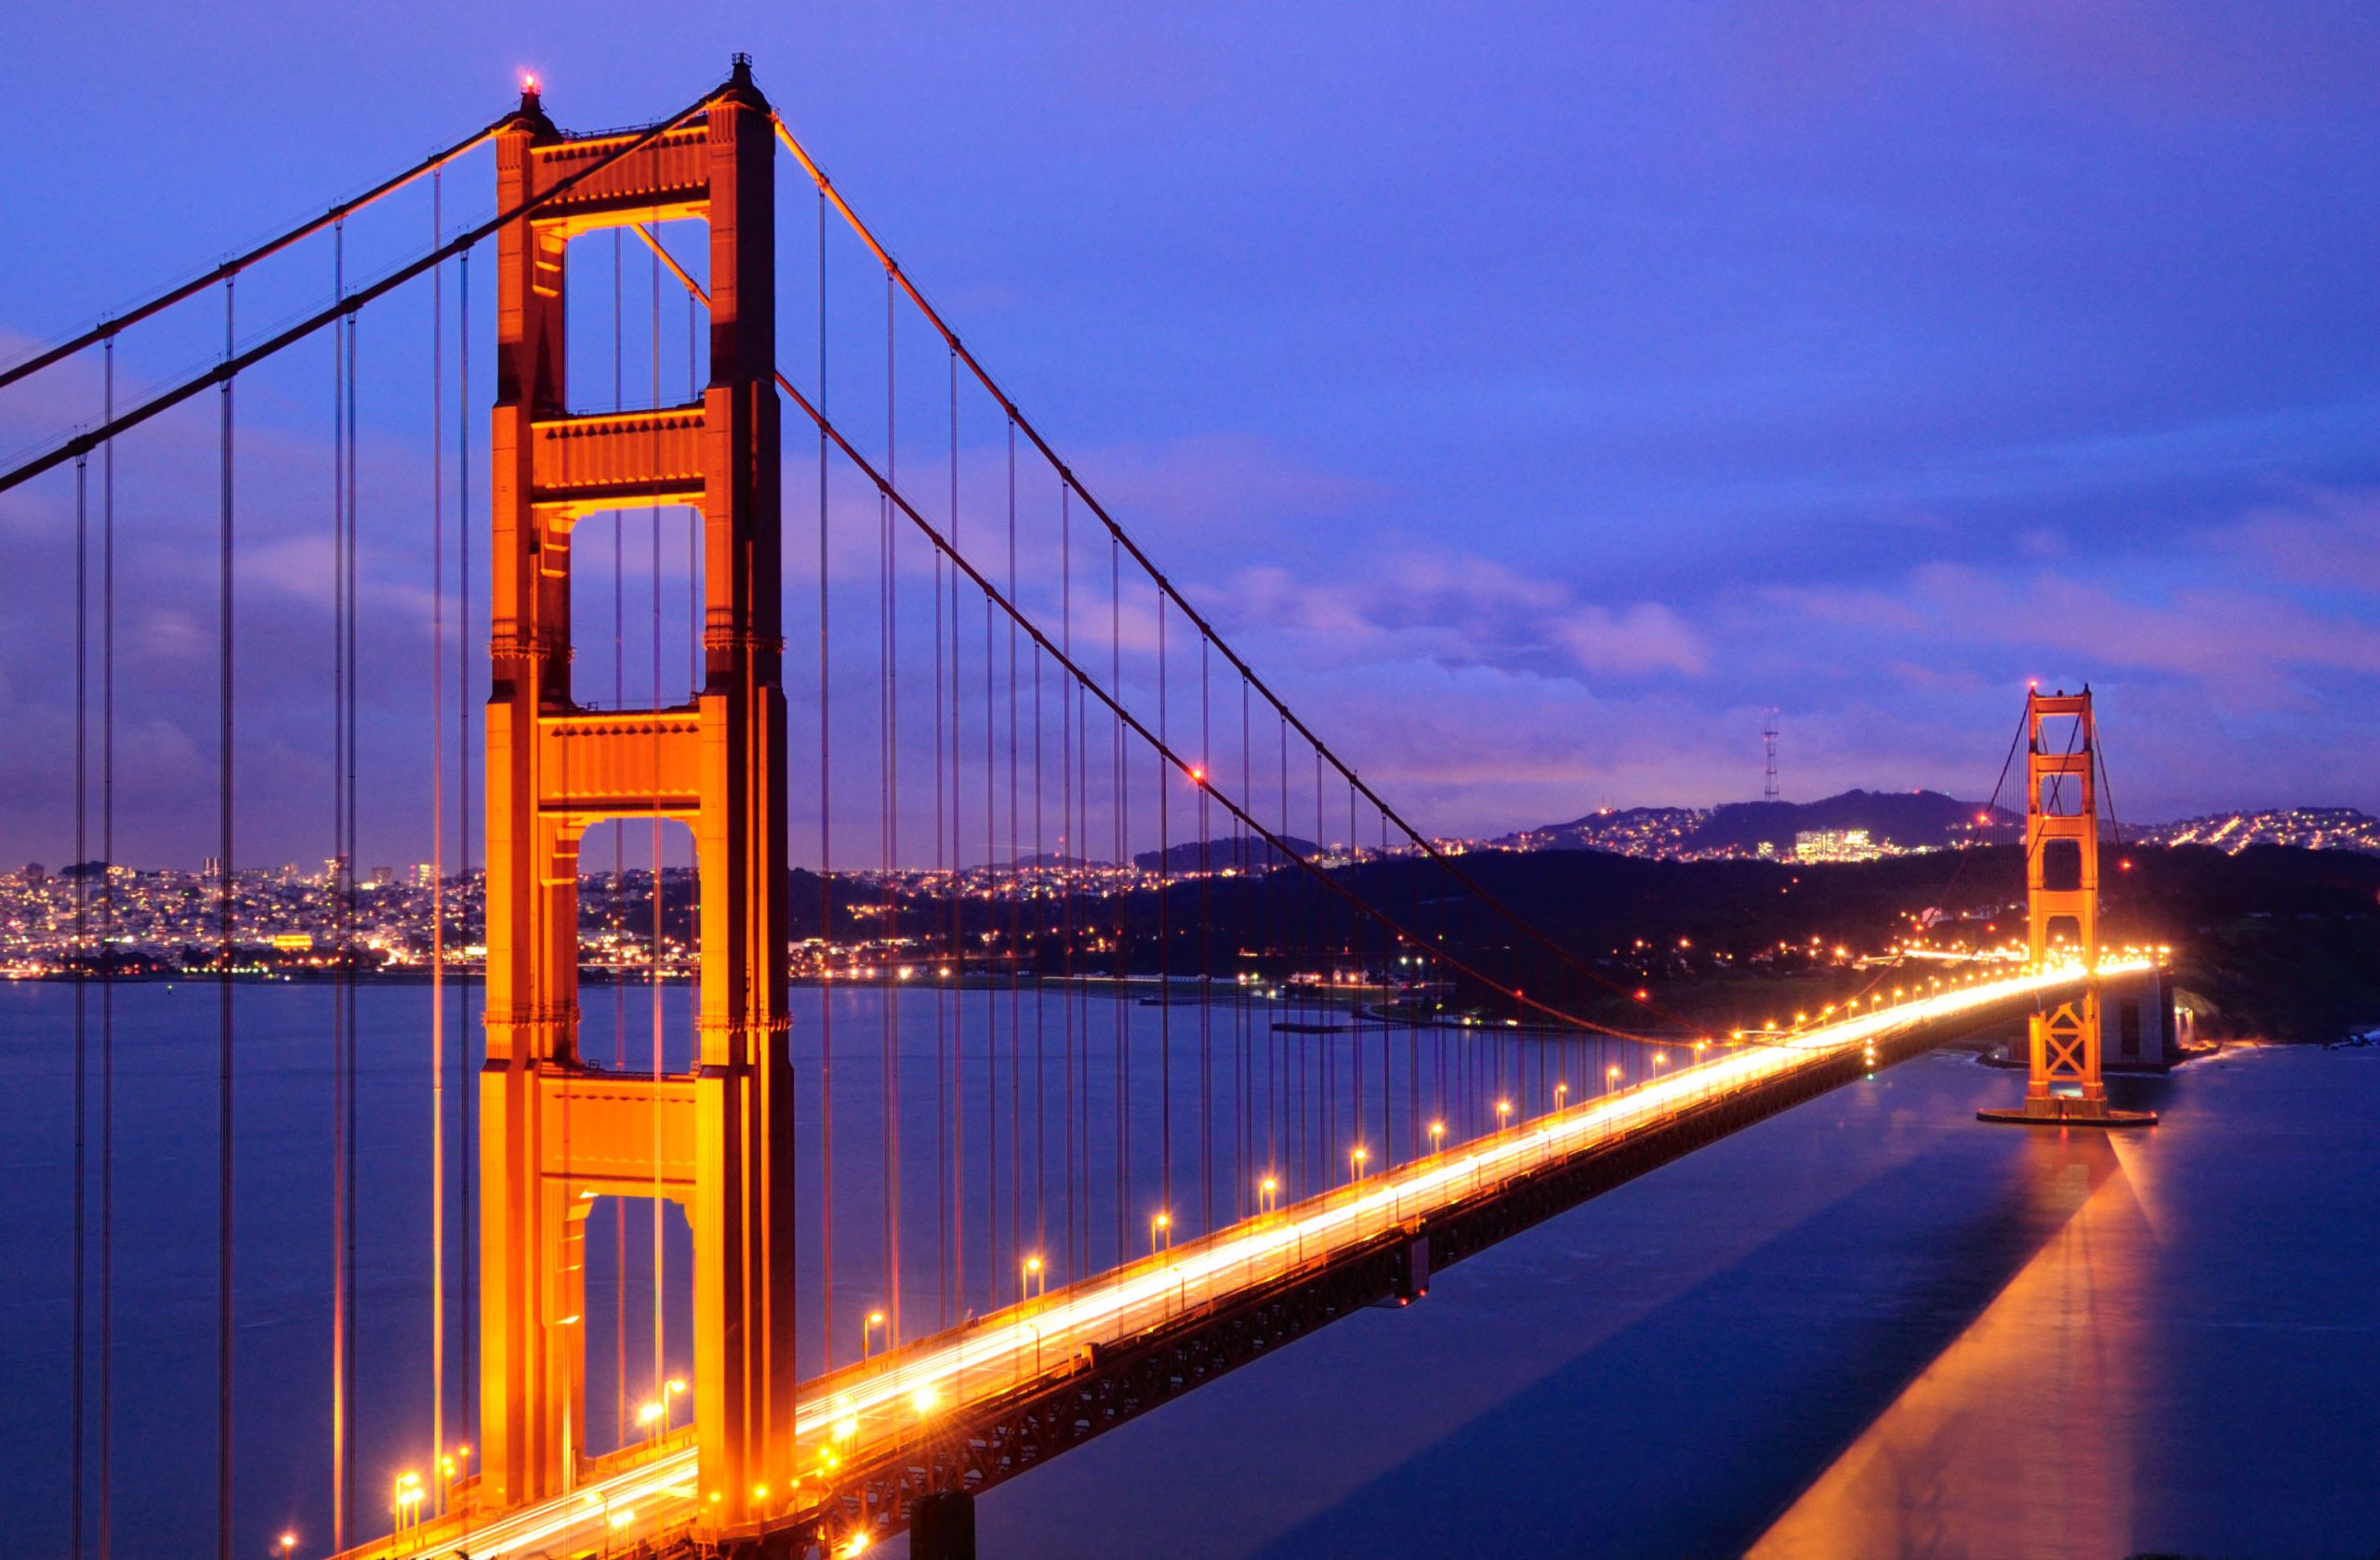 10 Things to Do in San Francisco at Night